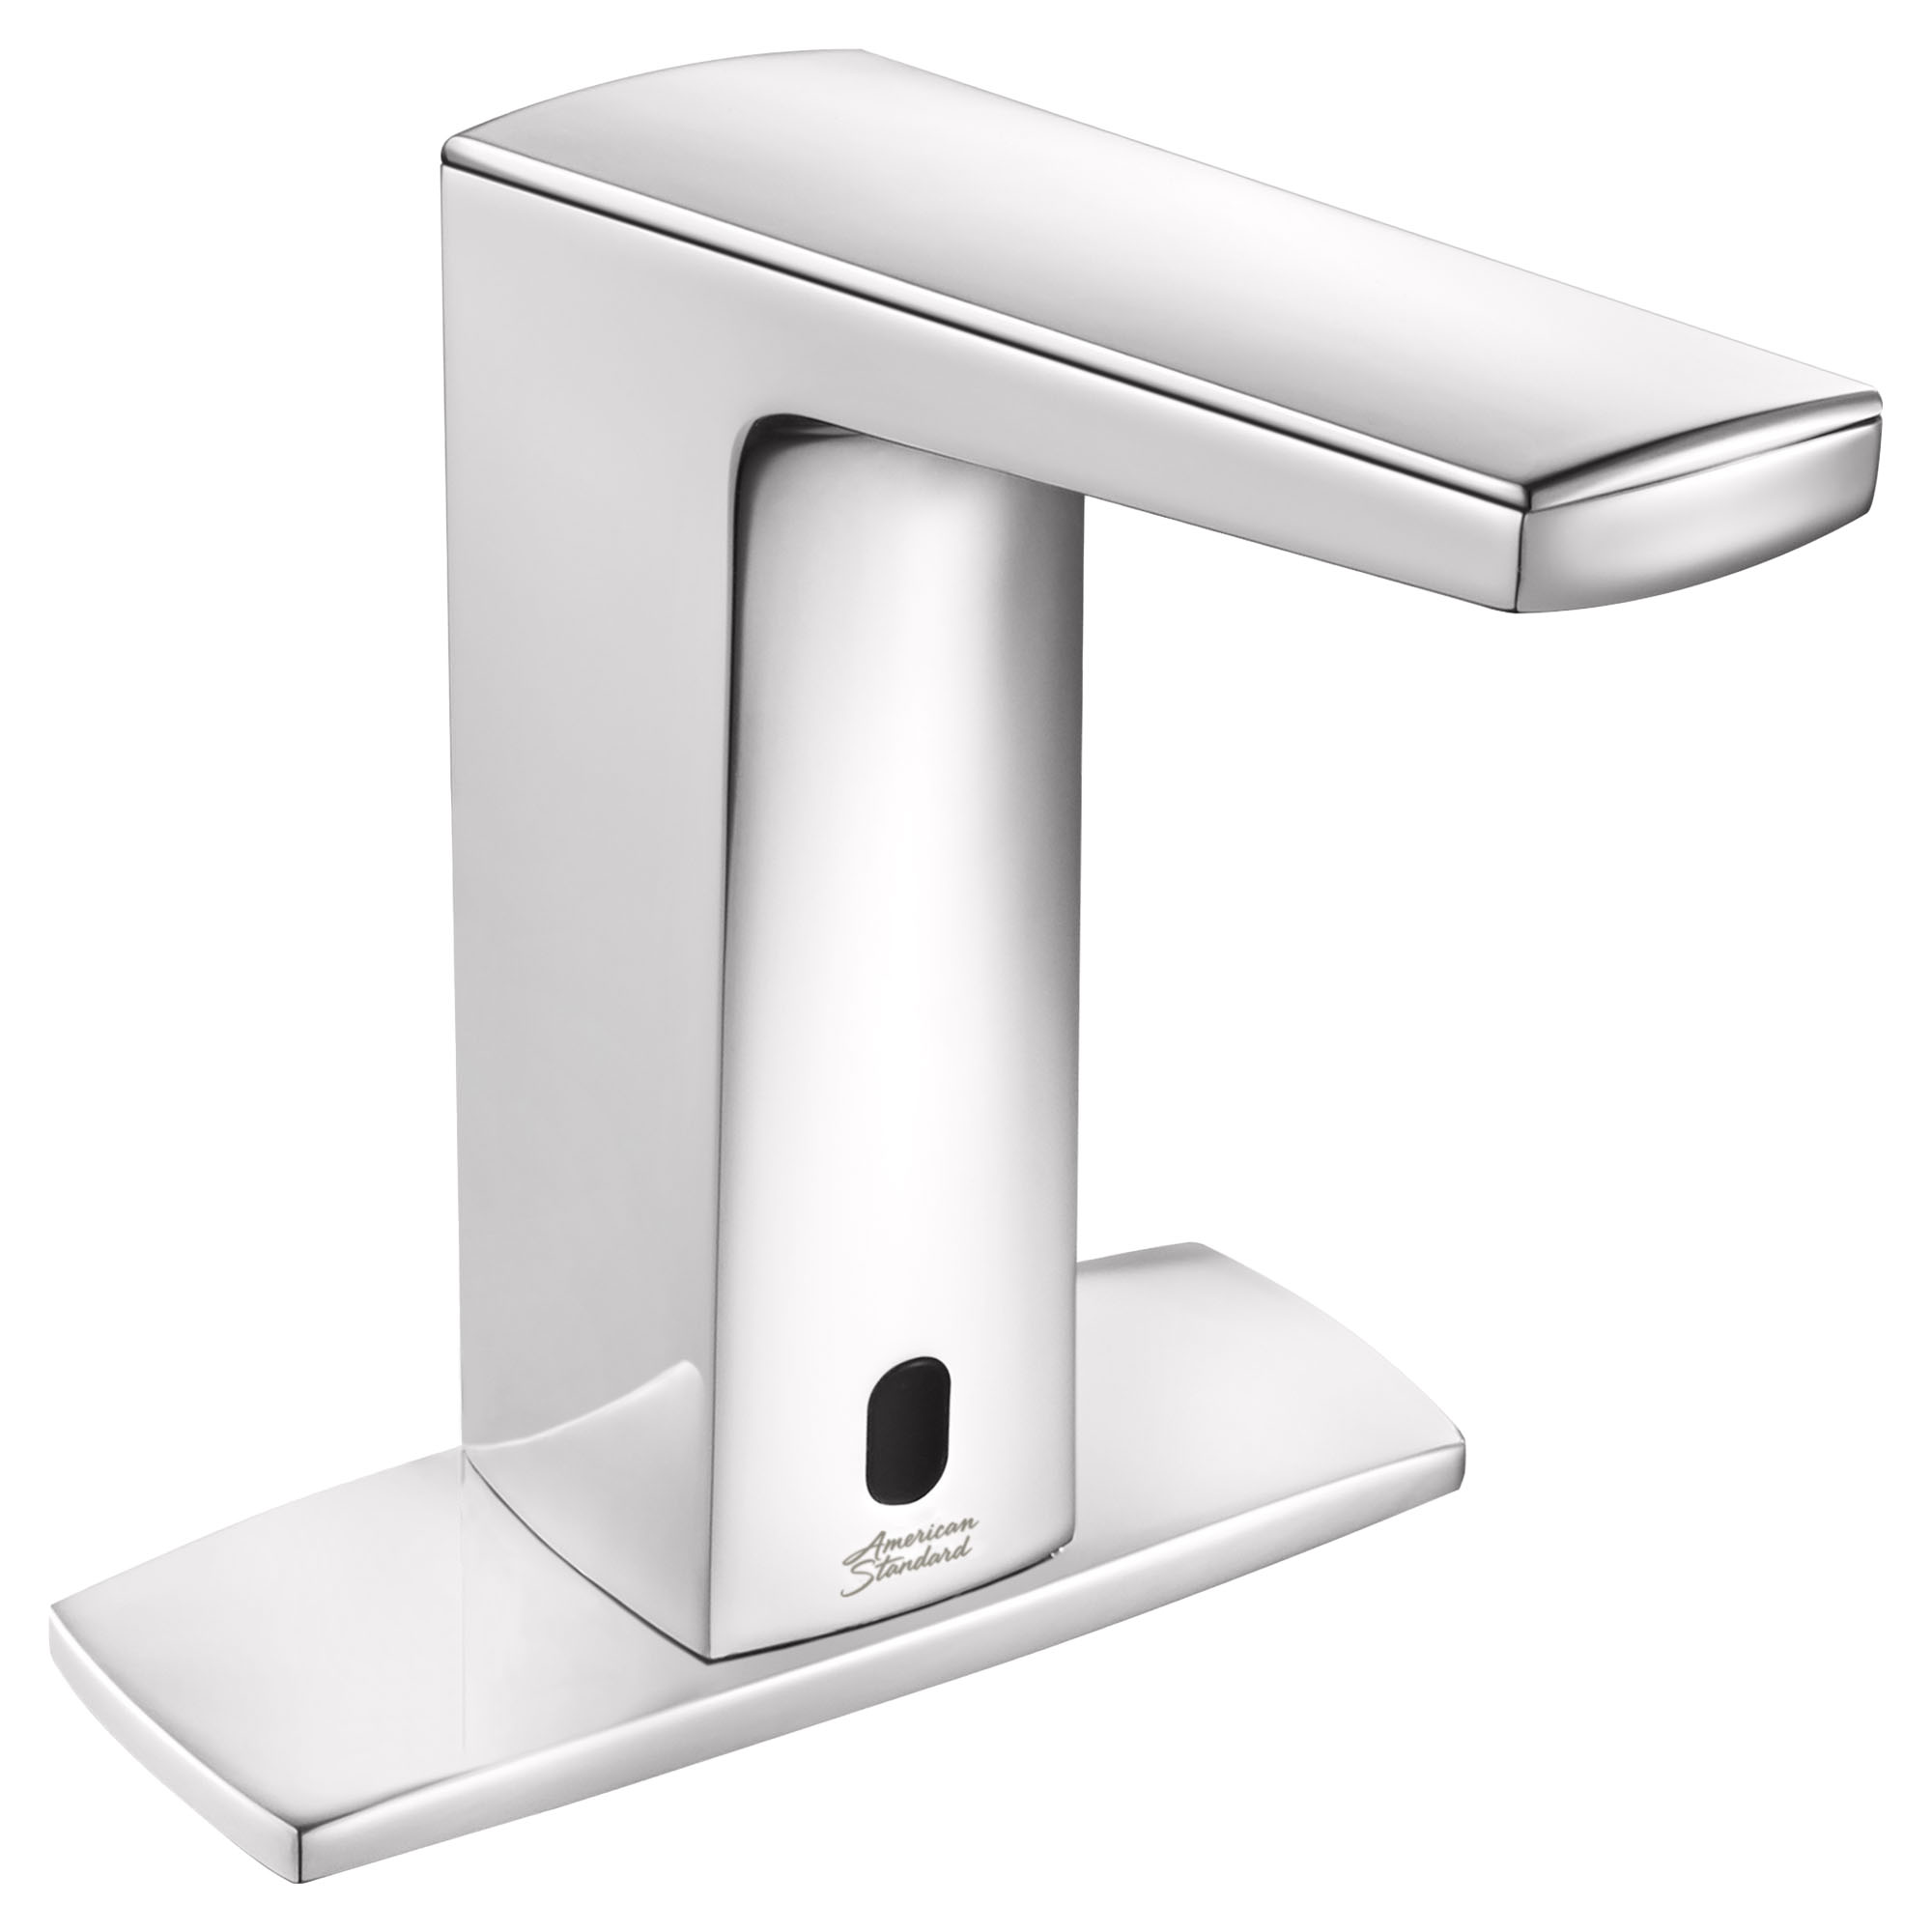 Paradigm™ Selectronic™ Touchless Faucet, Battery-Powered With Above-Deck Mixing, 0.35 gpm/1.3 Lpm